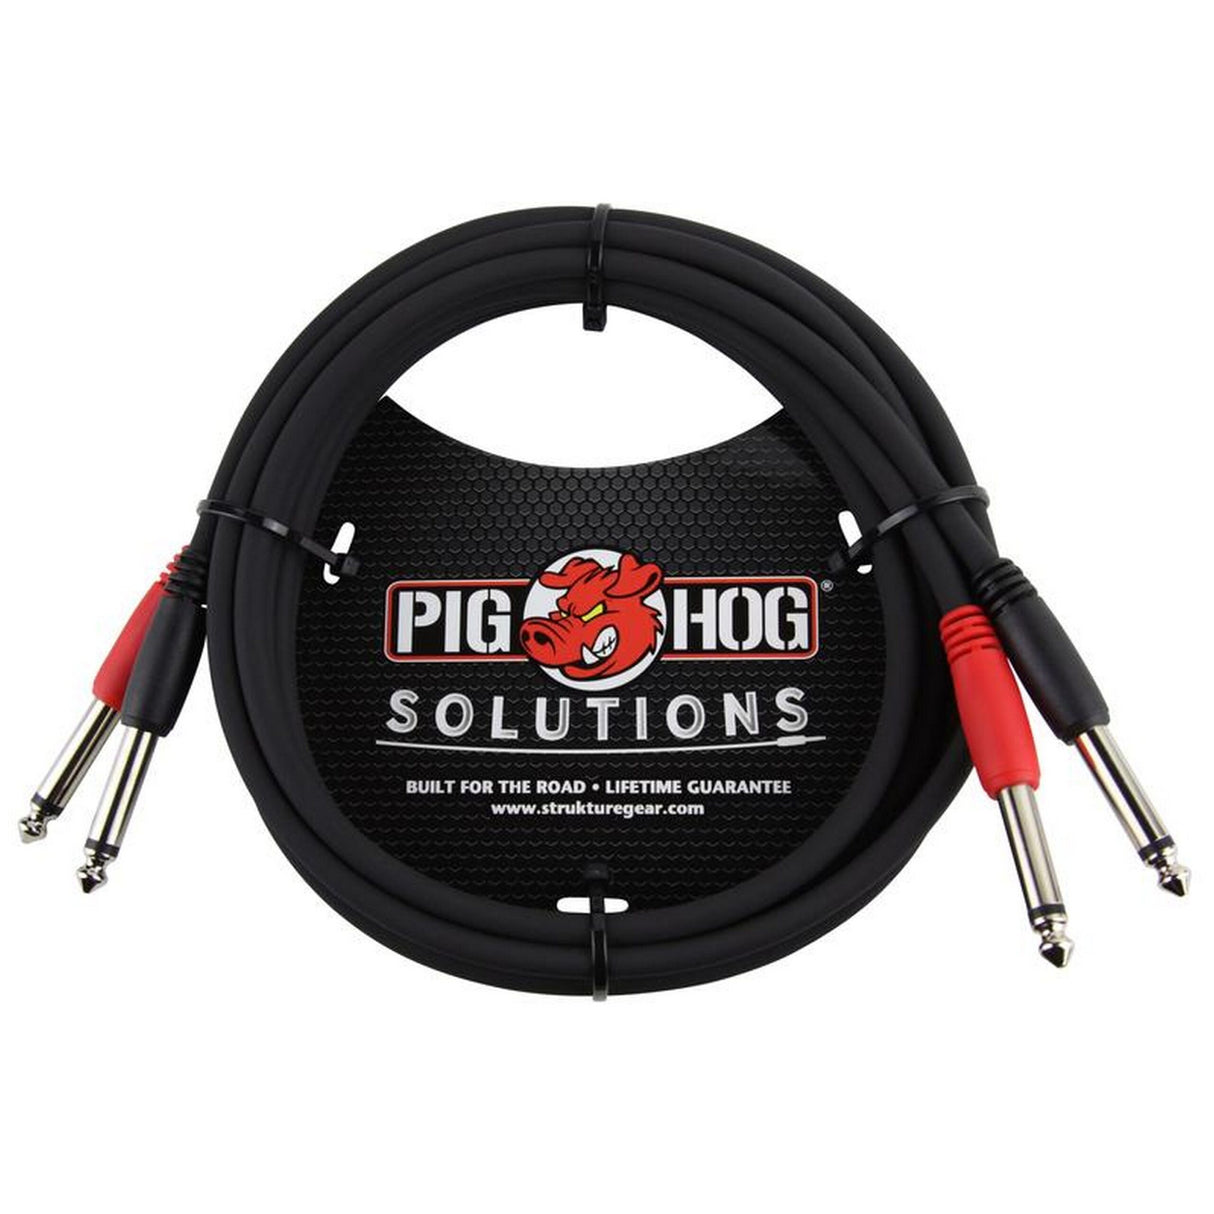 Pig Hog PD-21410 10-Foot 1/4-Inch-1/4-Inch Dual Cable